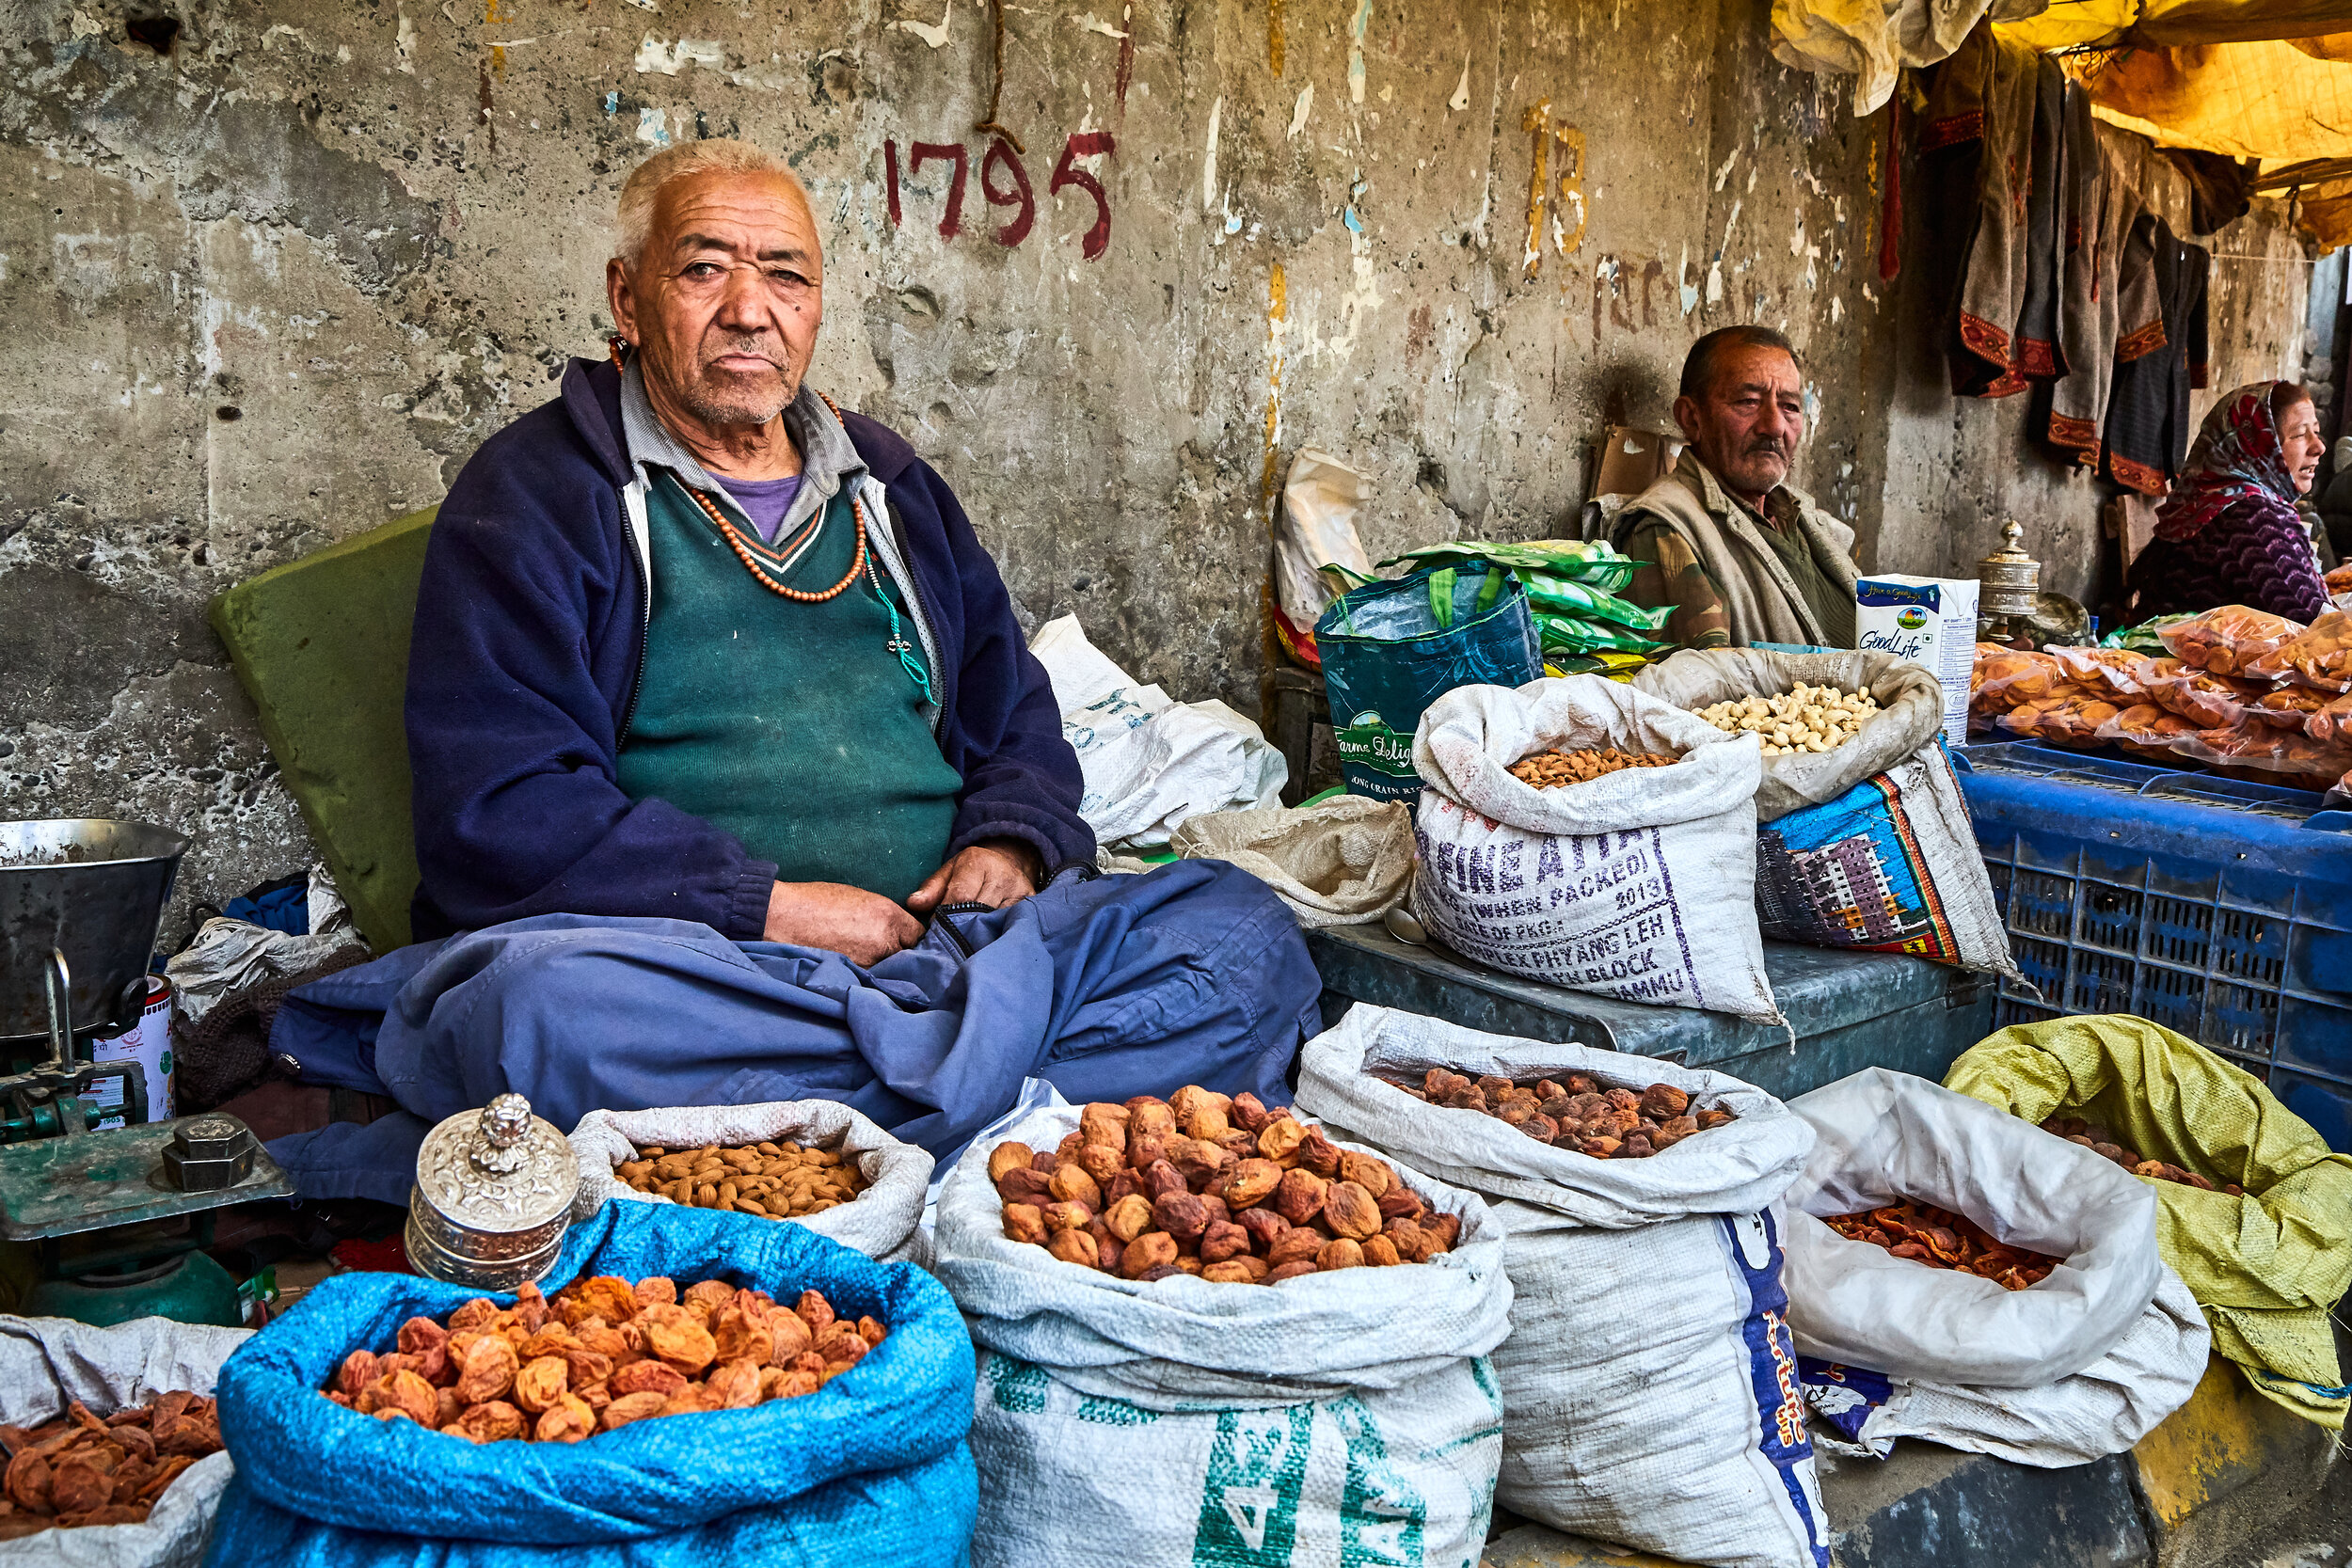  Markets in the capital city of Leh receive produce from all over the region and far away from other parts of India. A dried fruit seller in Leh. 